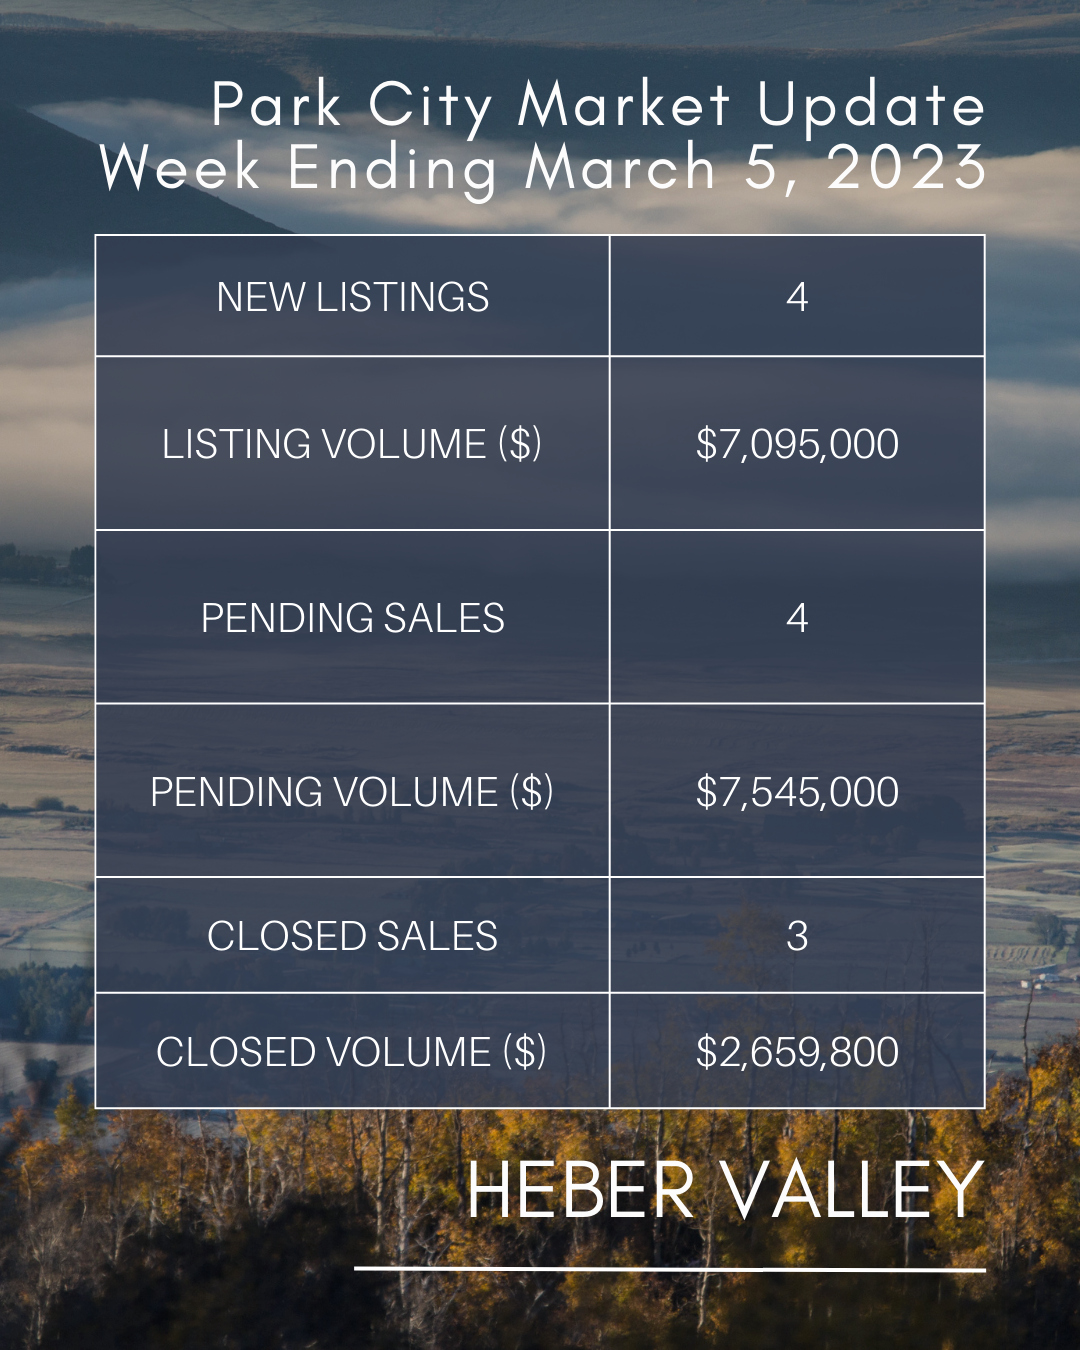 Image of Heber Valley with Market Statistics form March 5, 2023